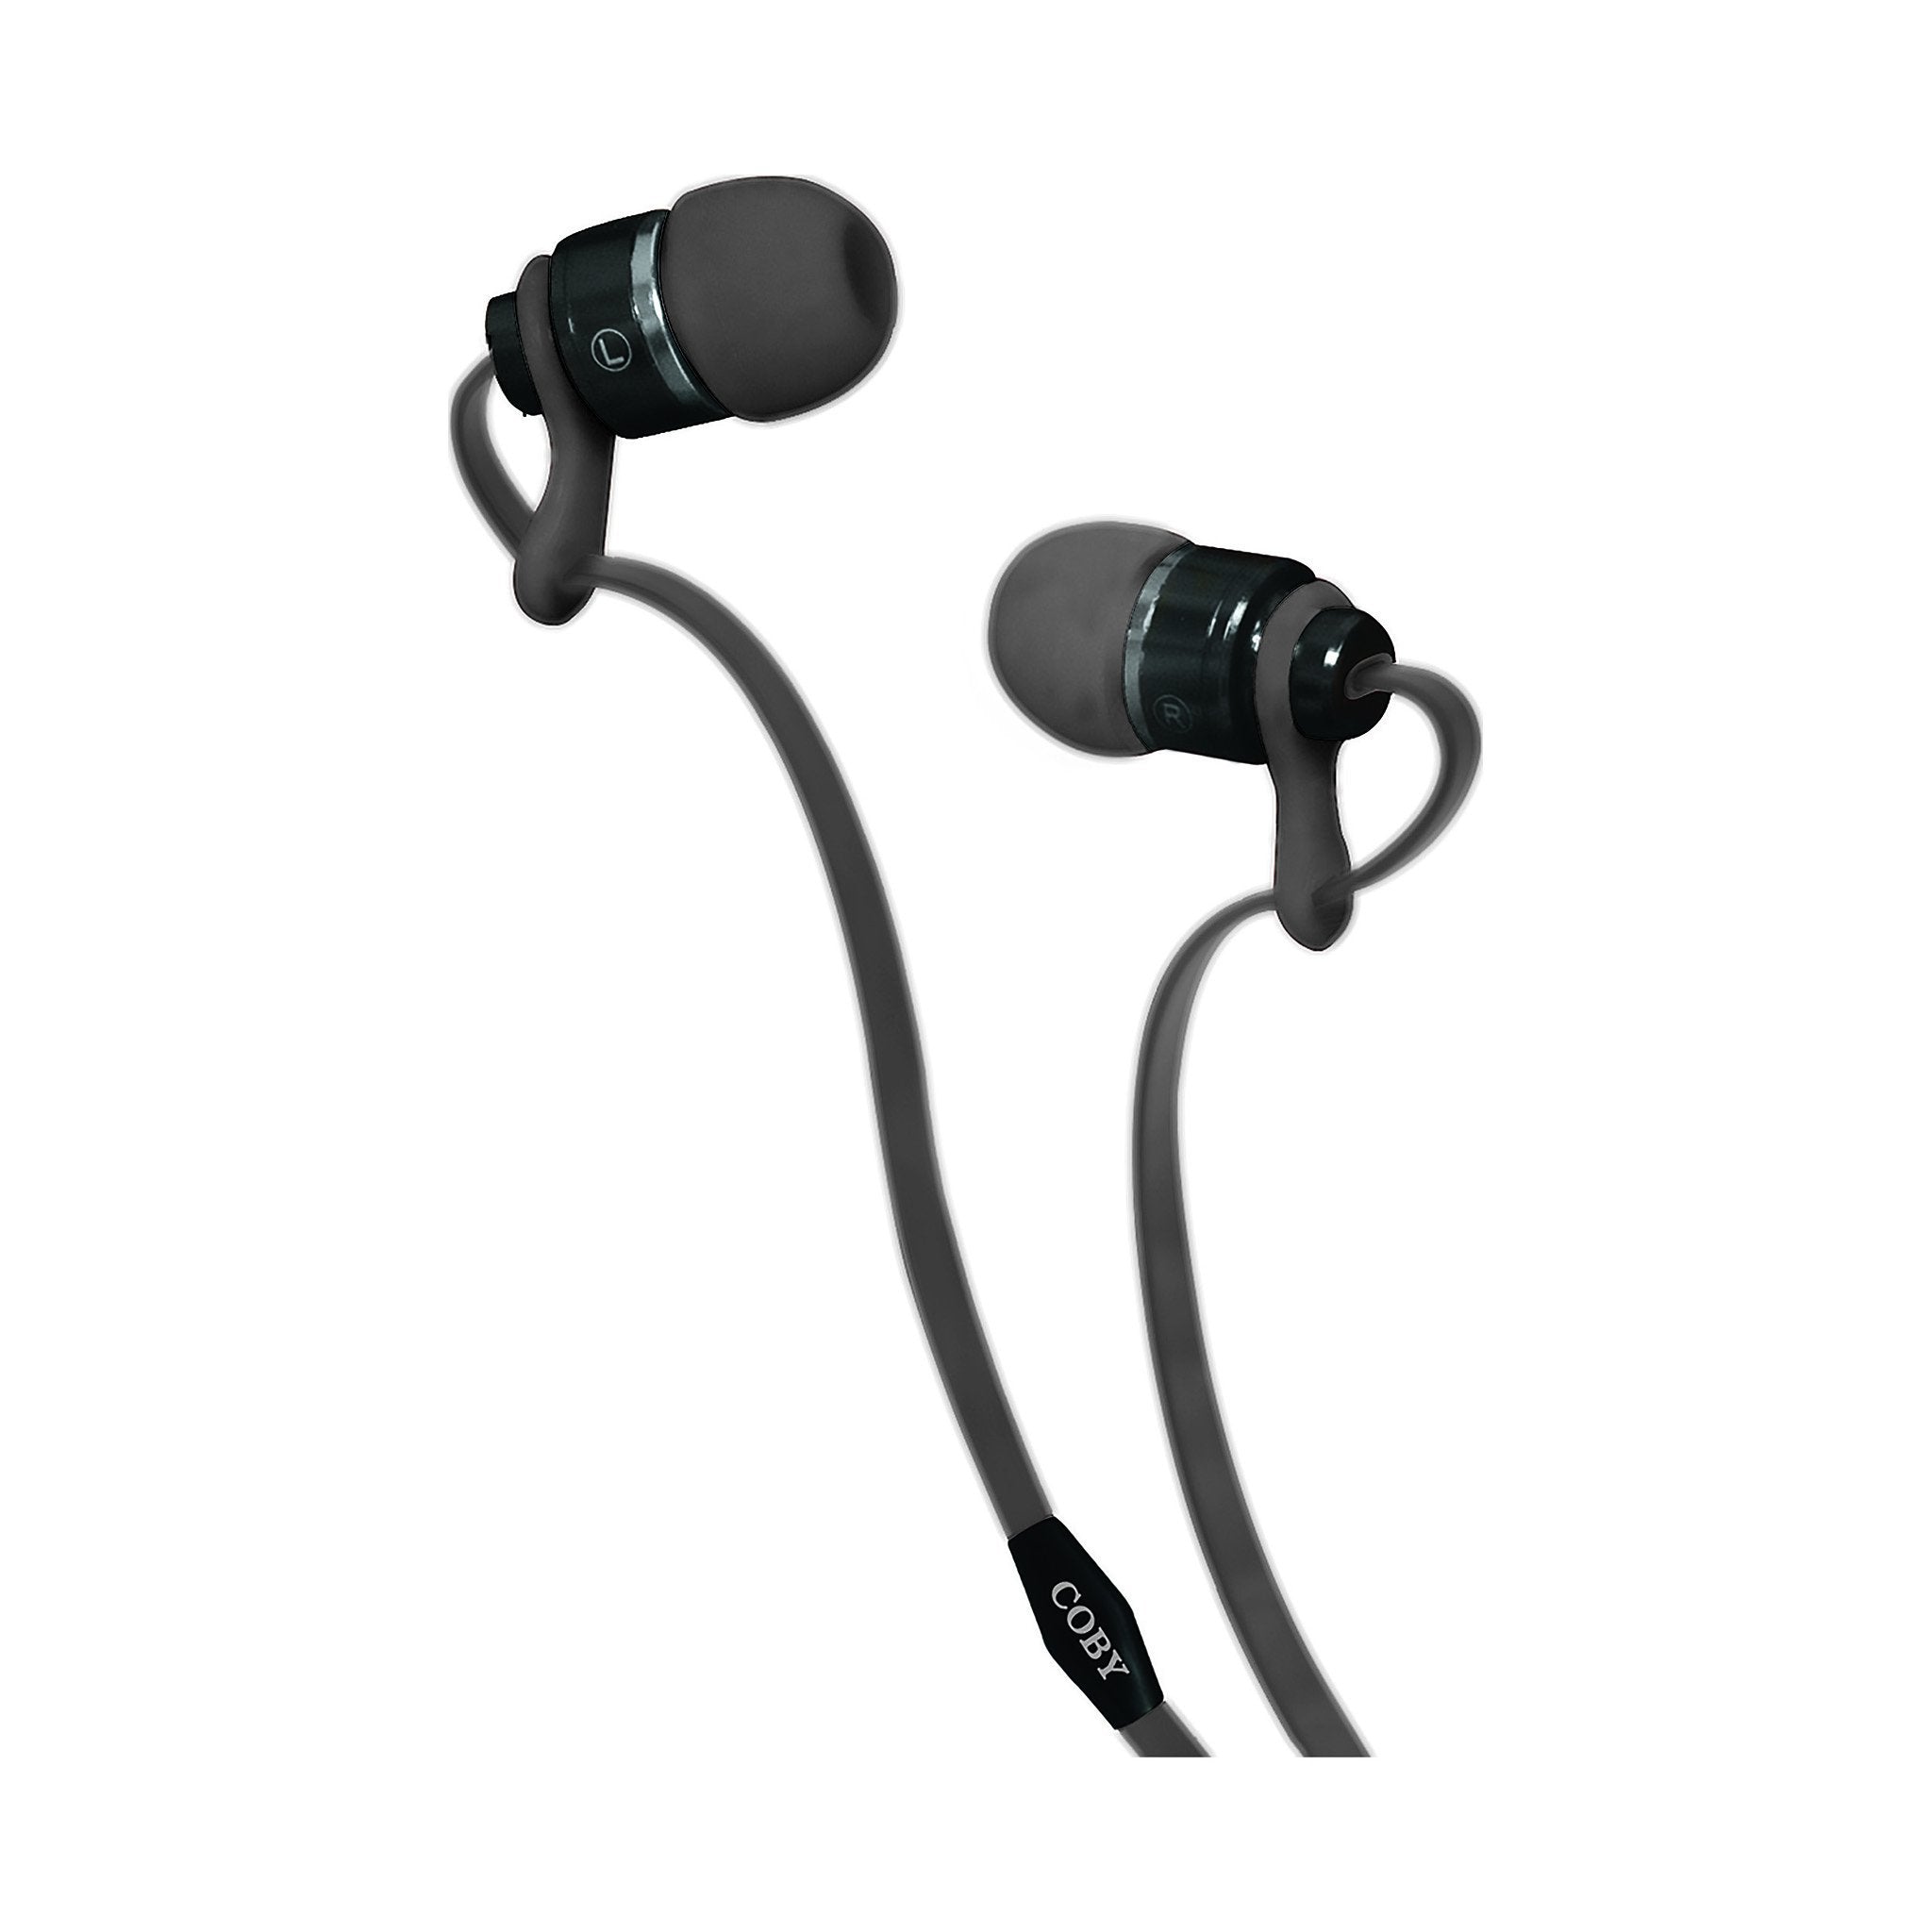 Deluxe Metal Stereo Earbuds